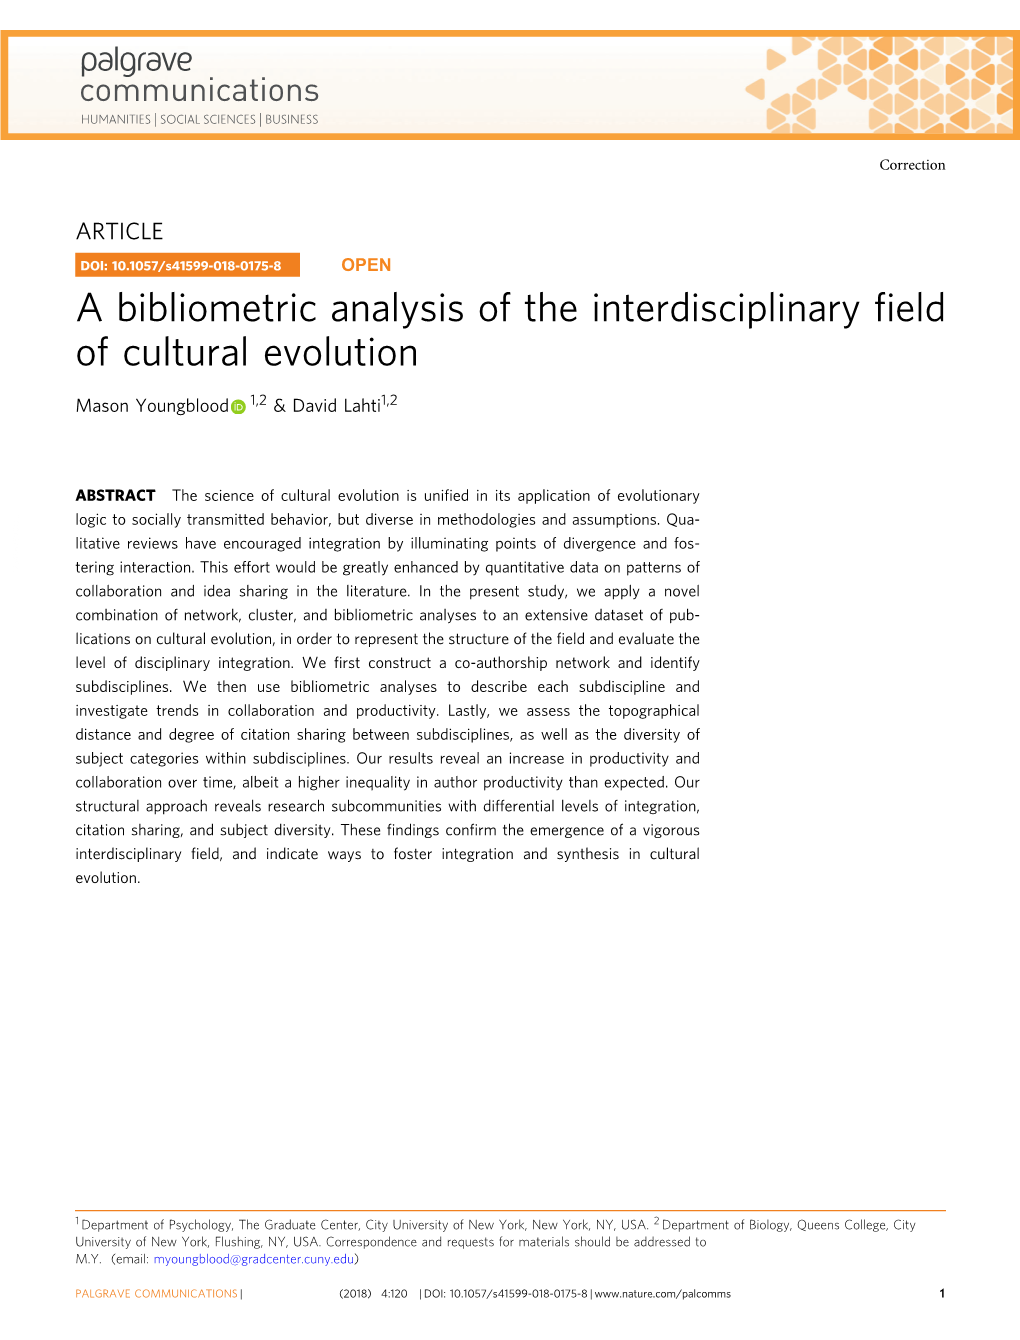 A Bibliometric Analysis of the Interdisciplinary Field of Cultural